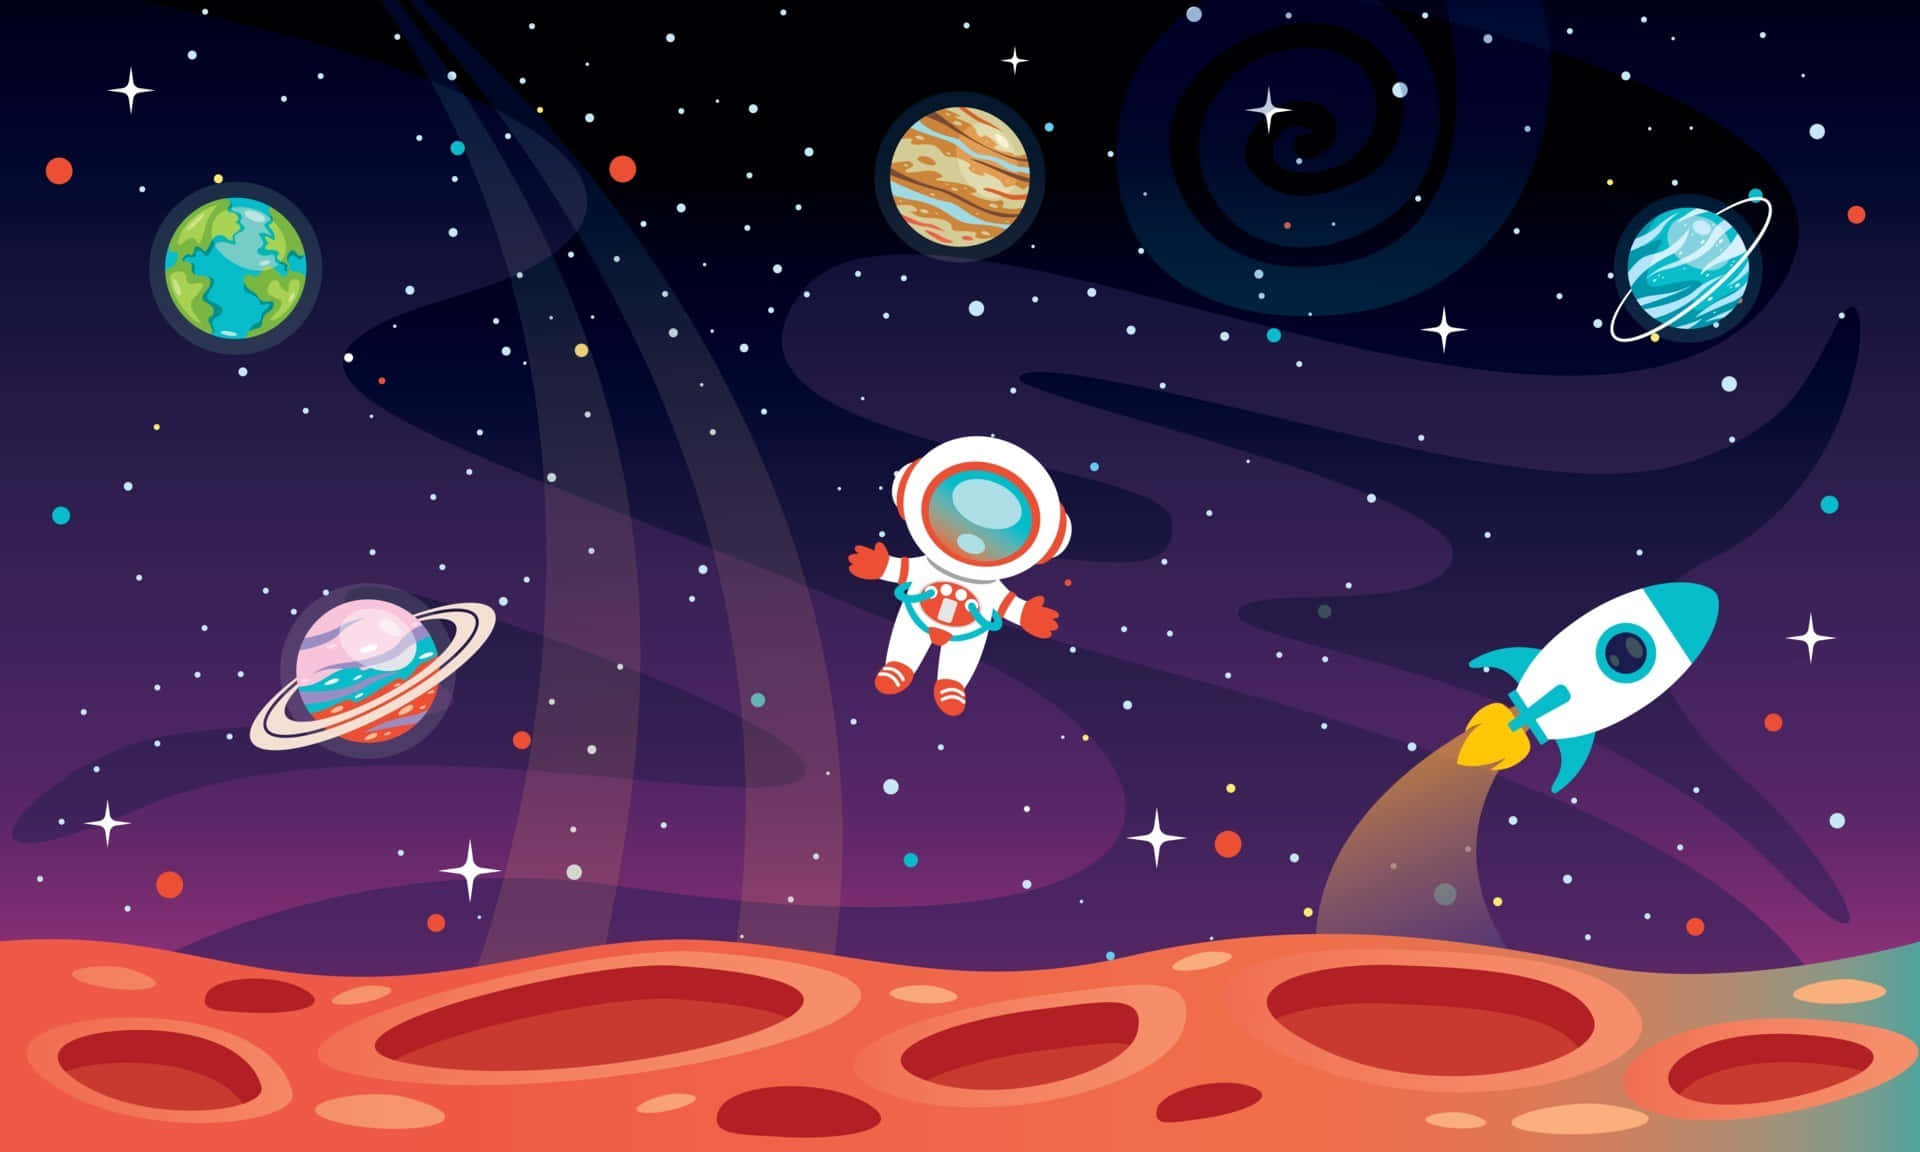 Cartoon Astronauts In Space With Planets And Stars